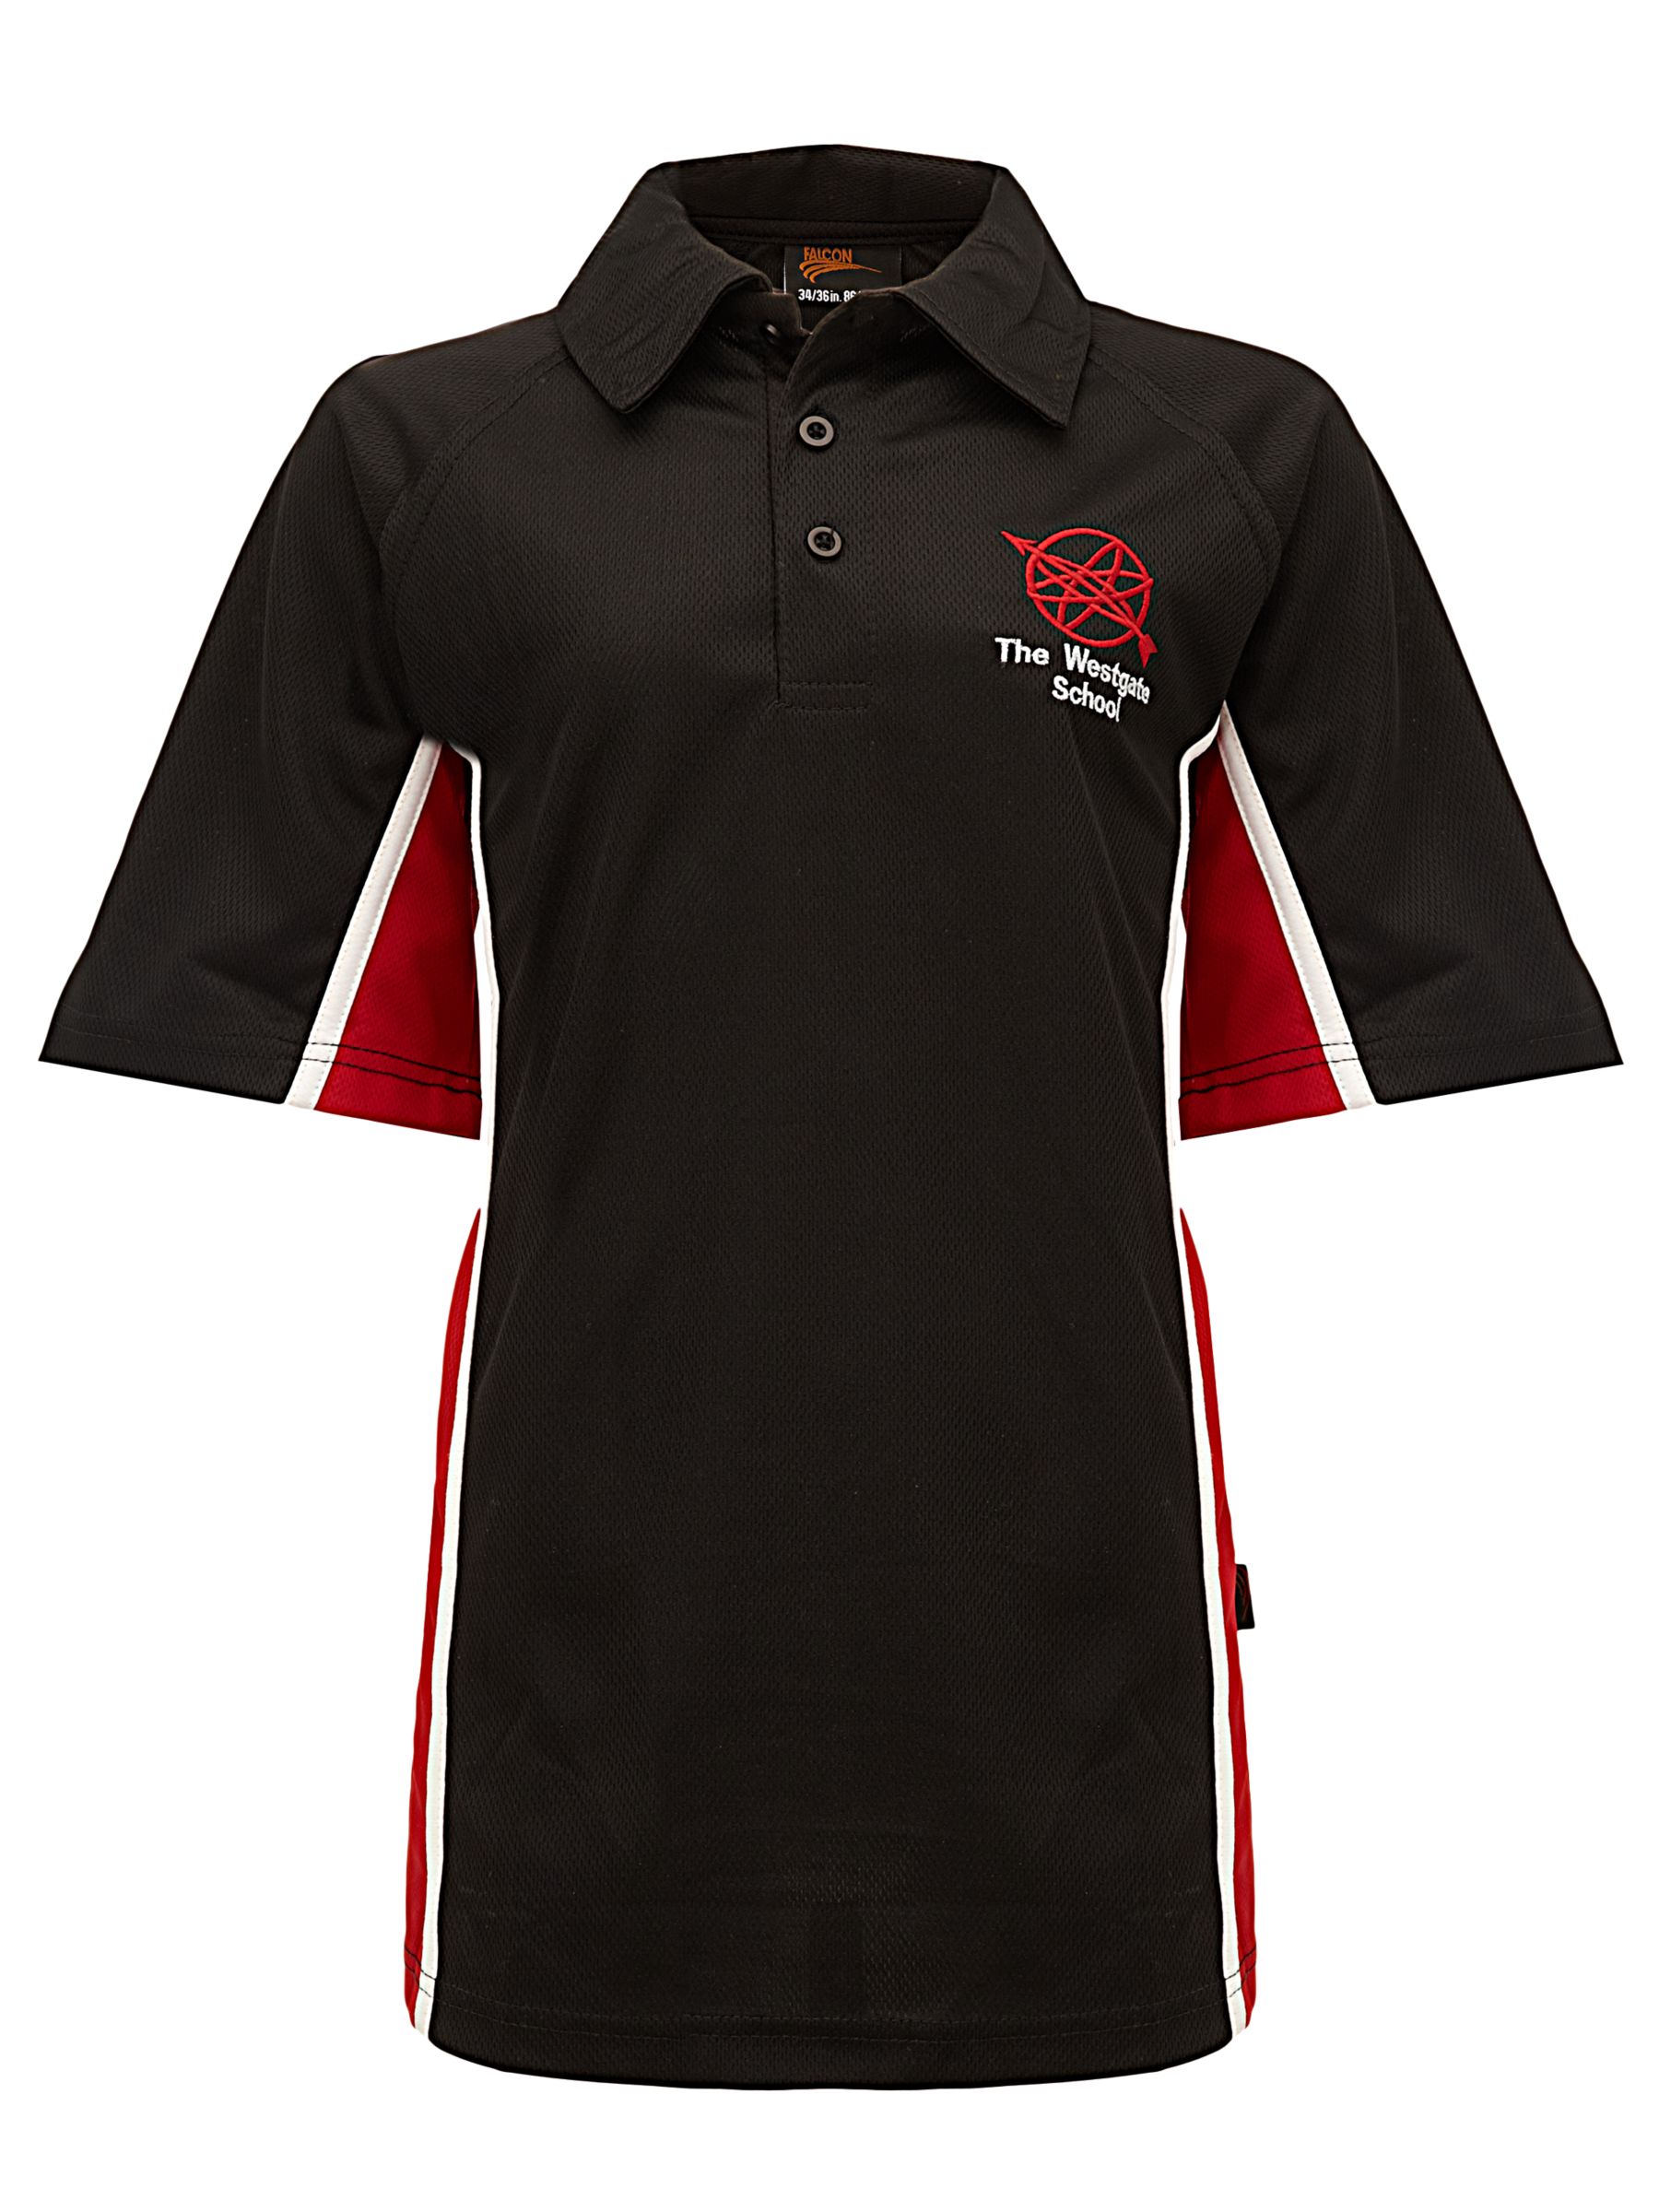 The Westgate School Polo Shirt, Black/Red